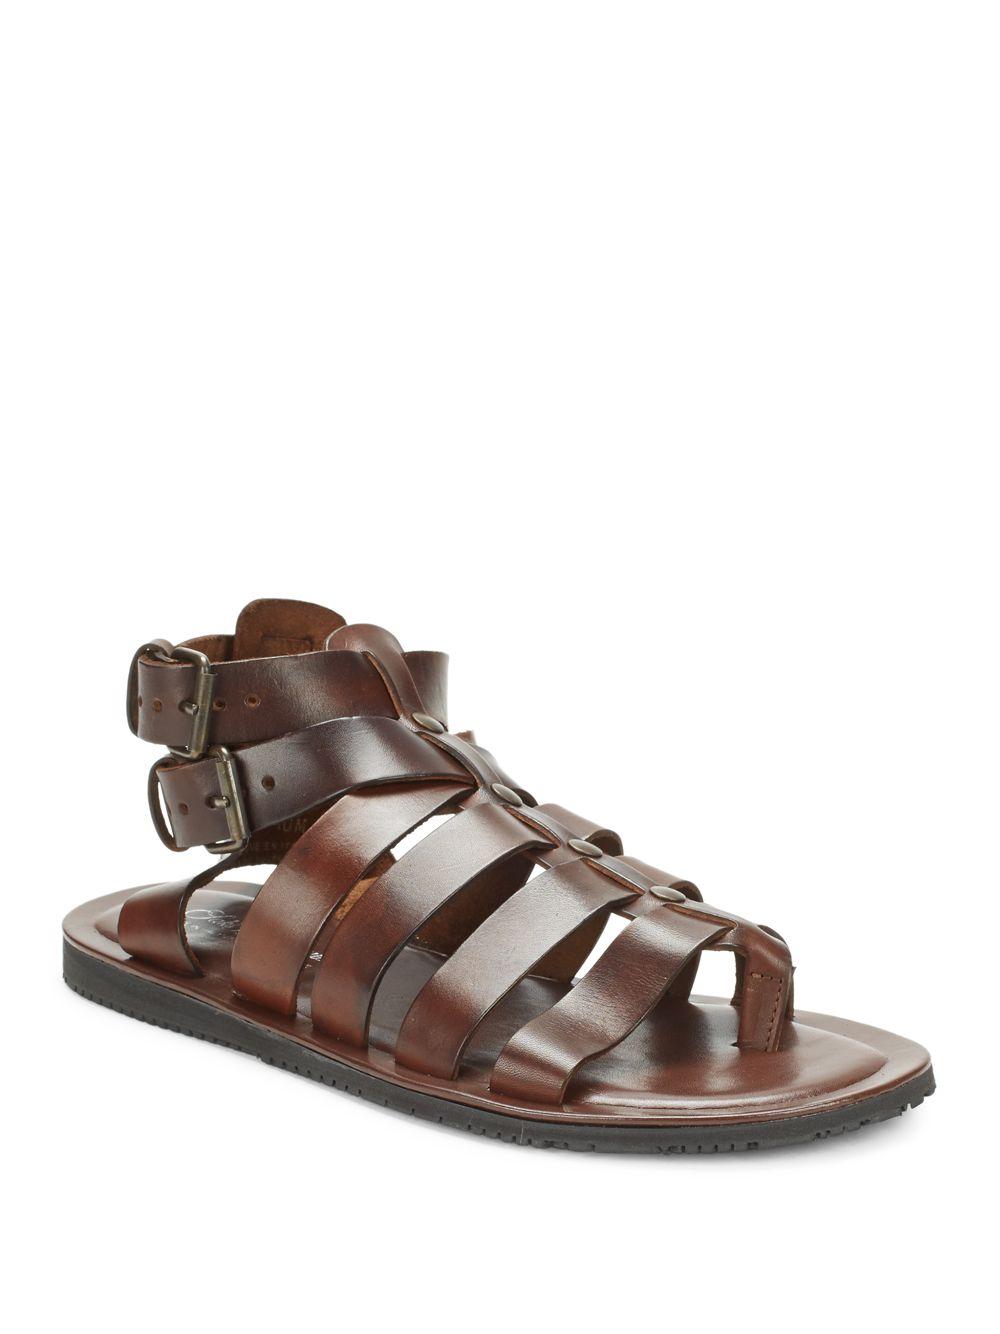 Saks fifth avenue Leather Gladiator Sandals in Brown for Men | Lyst